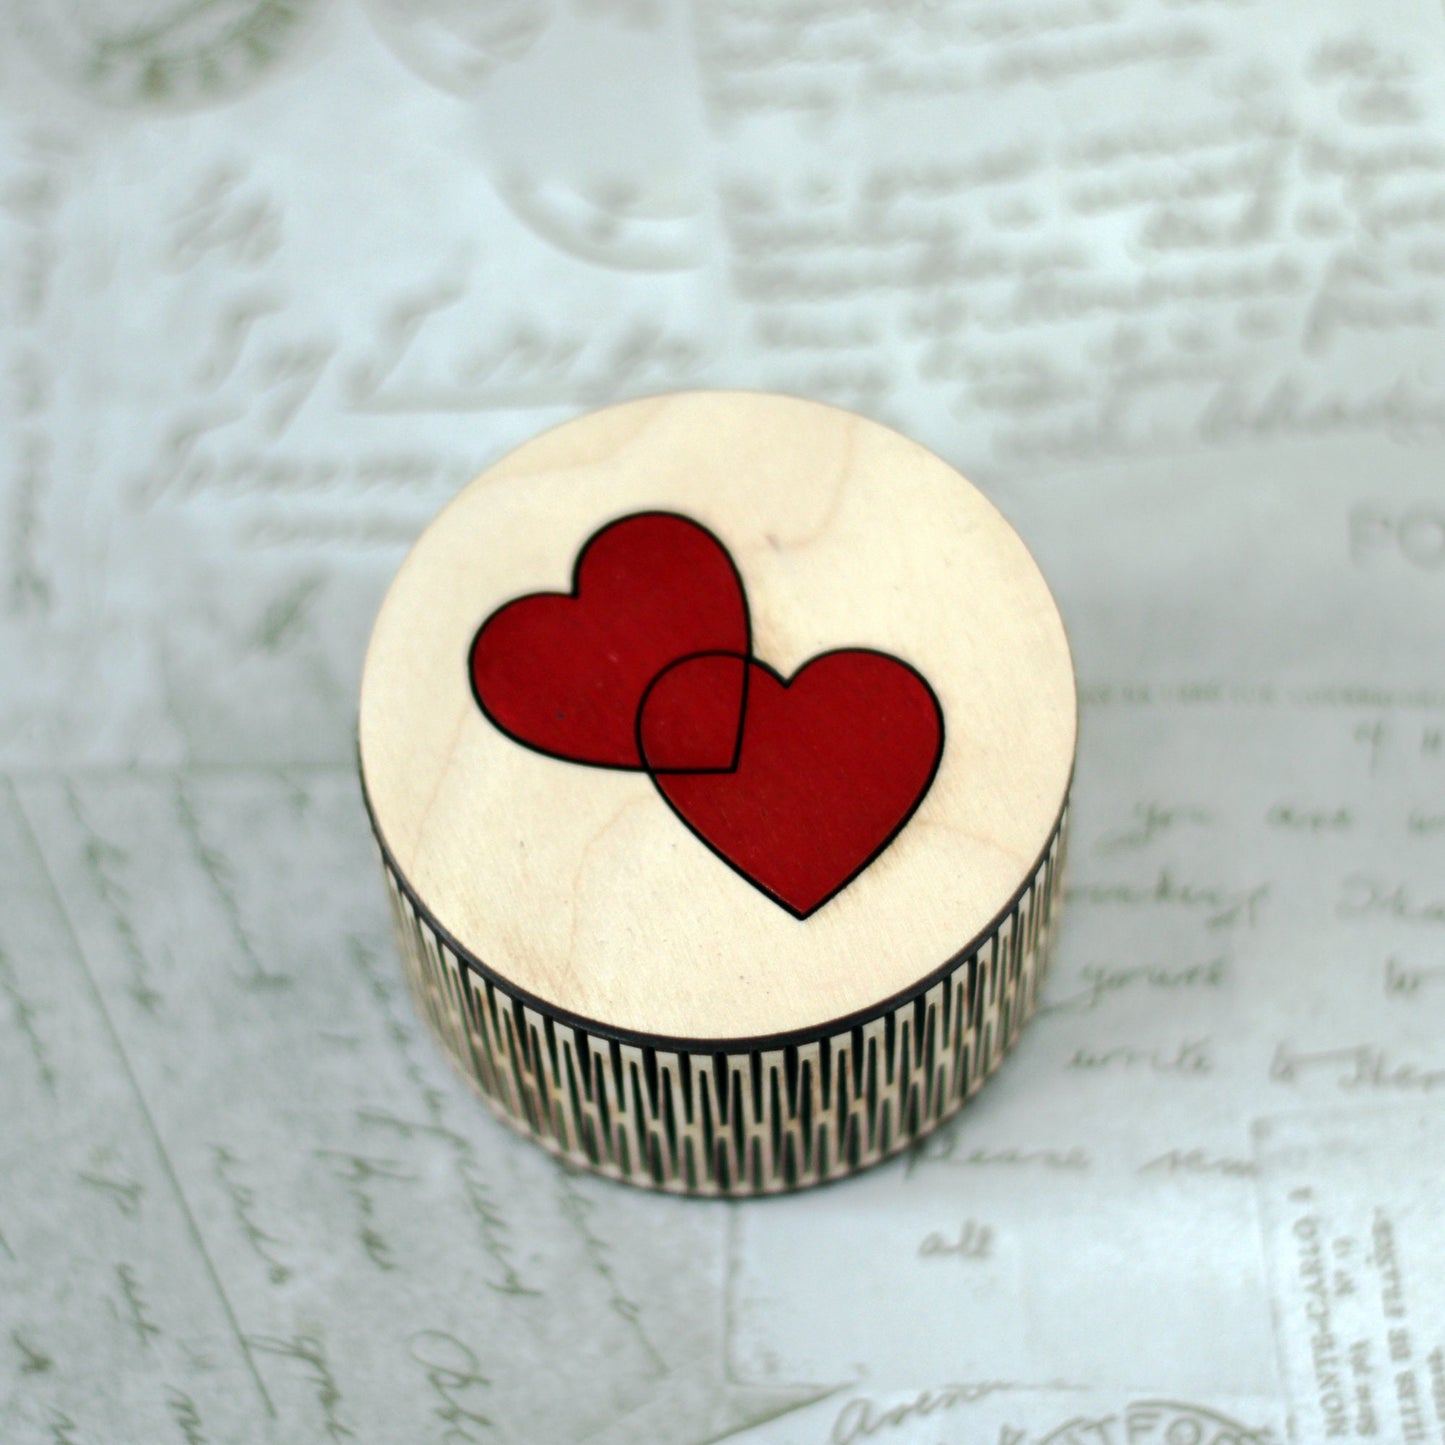 Small wooden trinket box with entwined hearts lid.